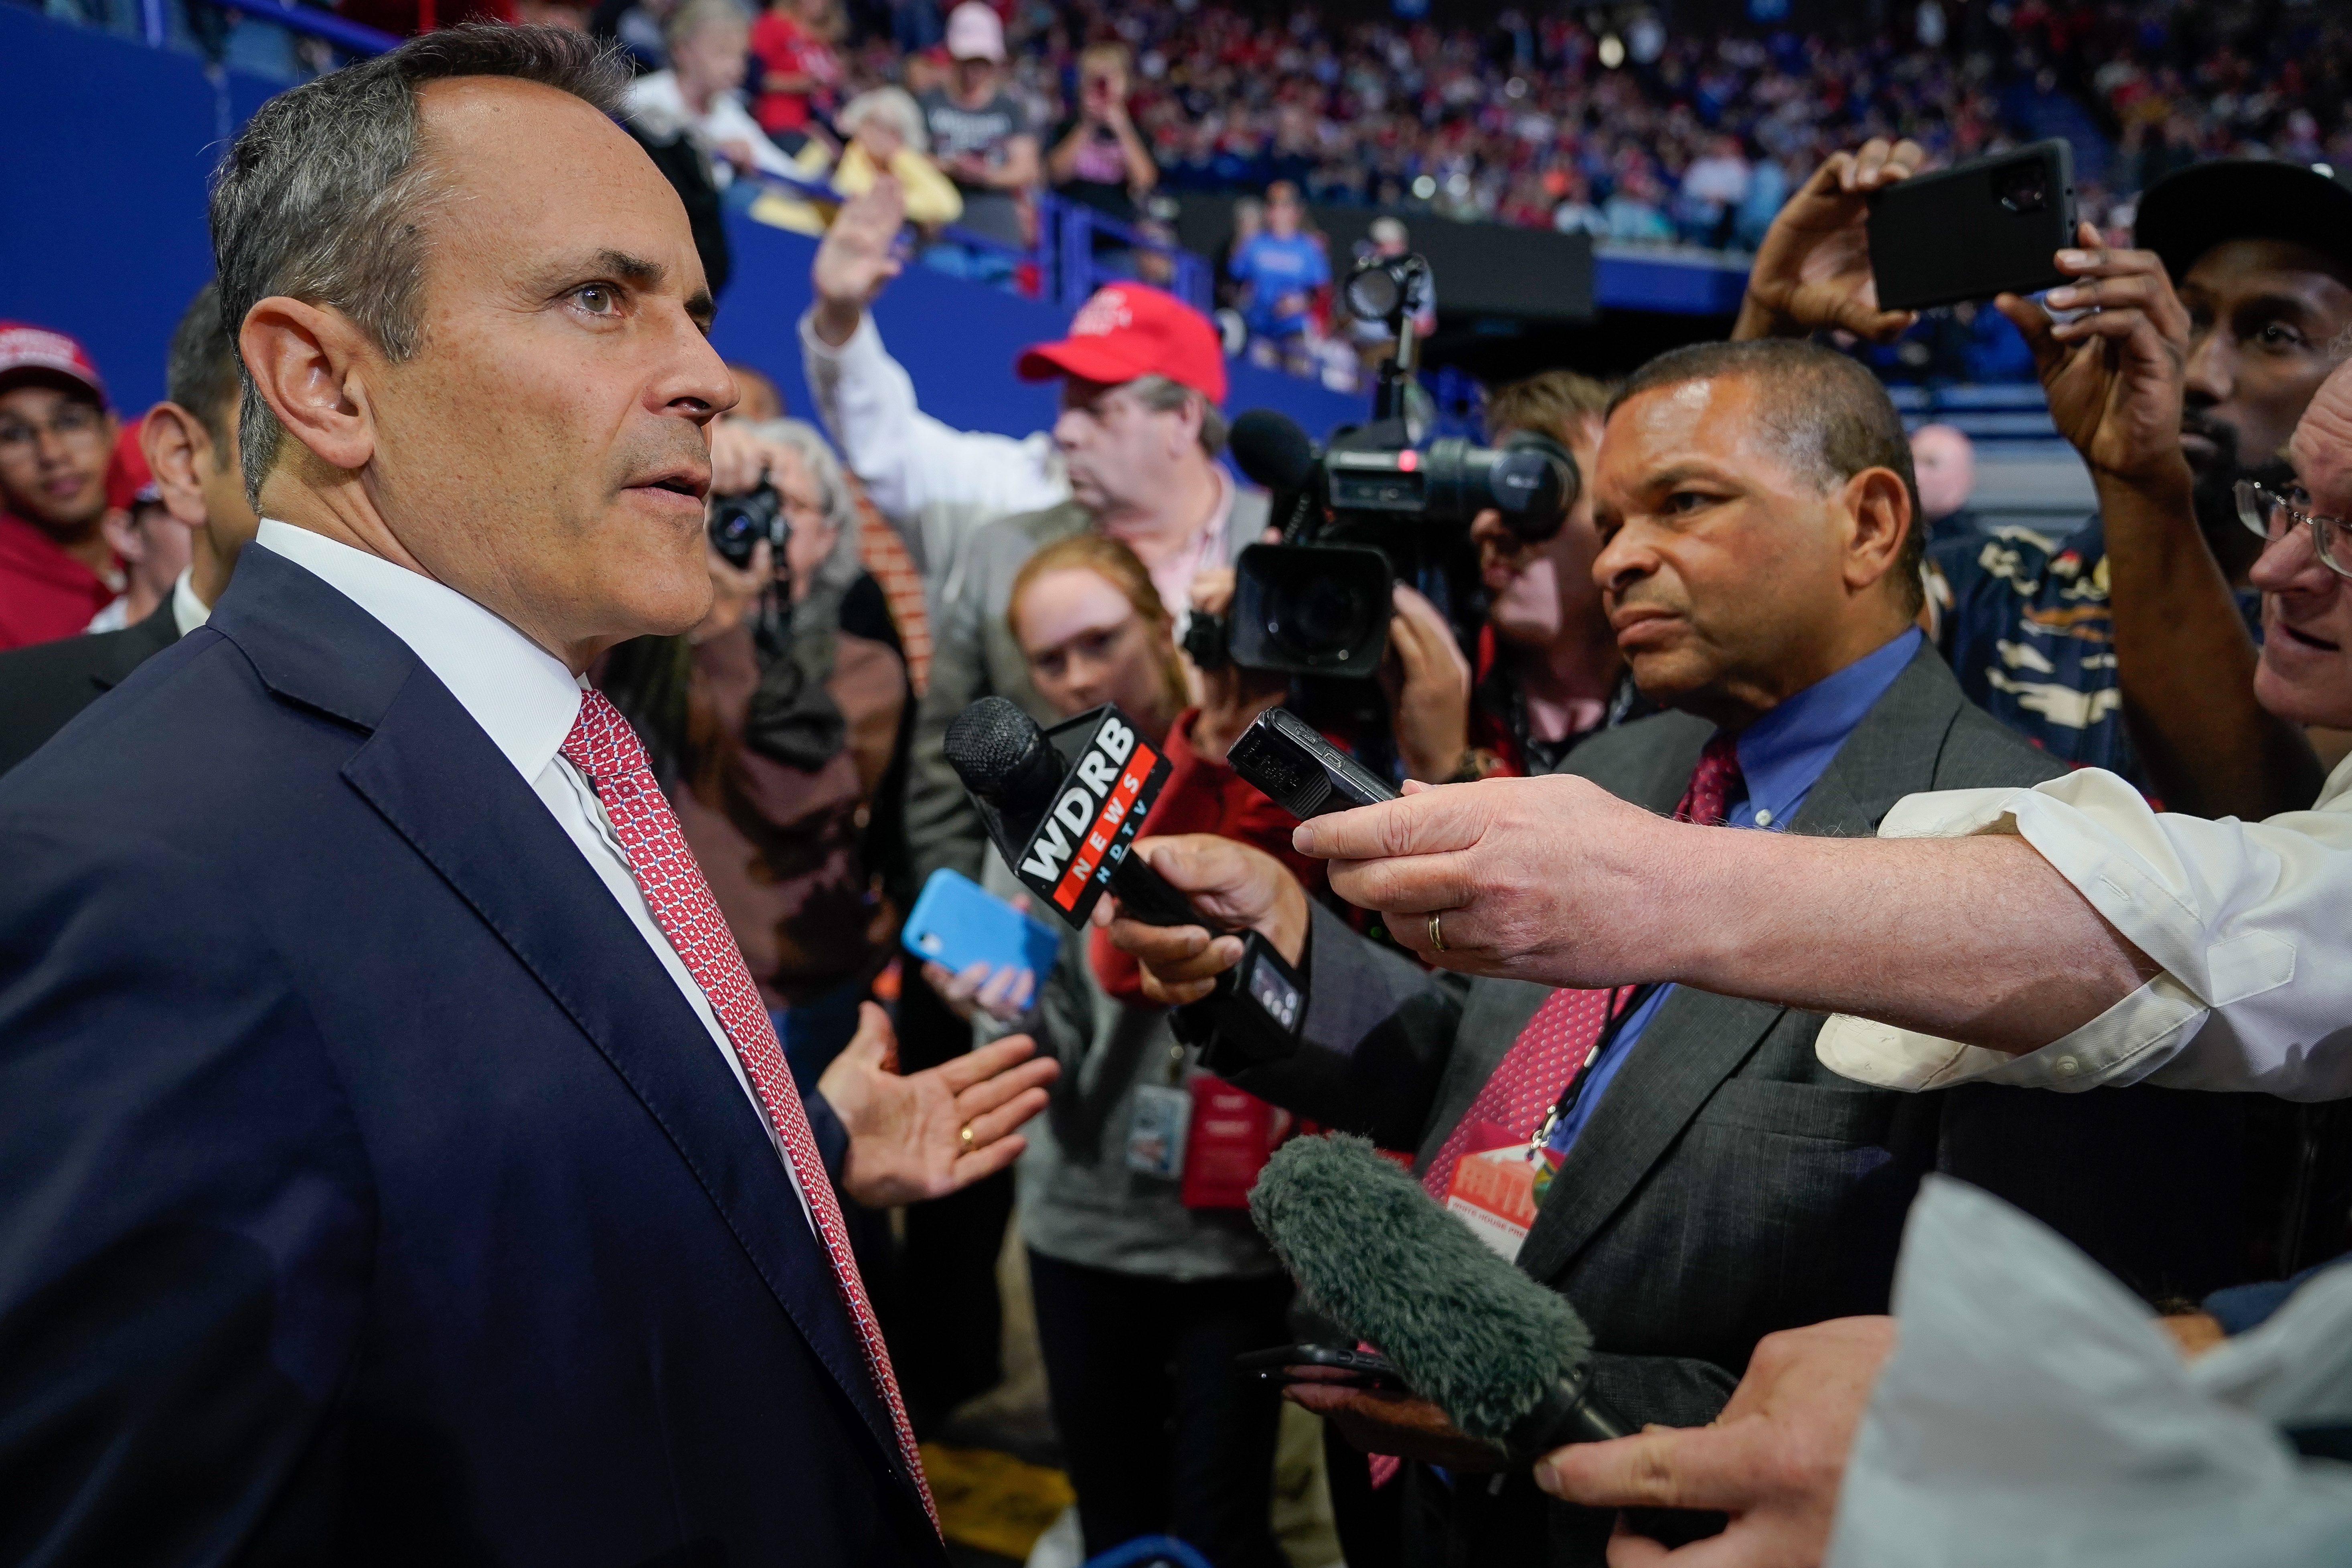 Matt Bevin speaks into a microphone held by a reporter at a crowded rally.